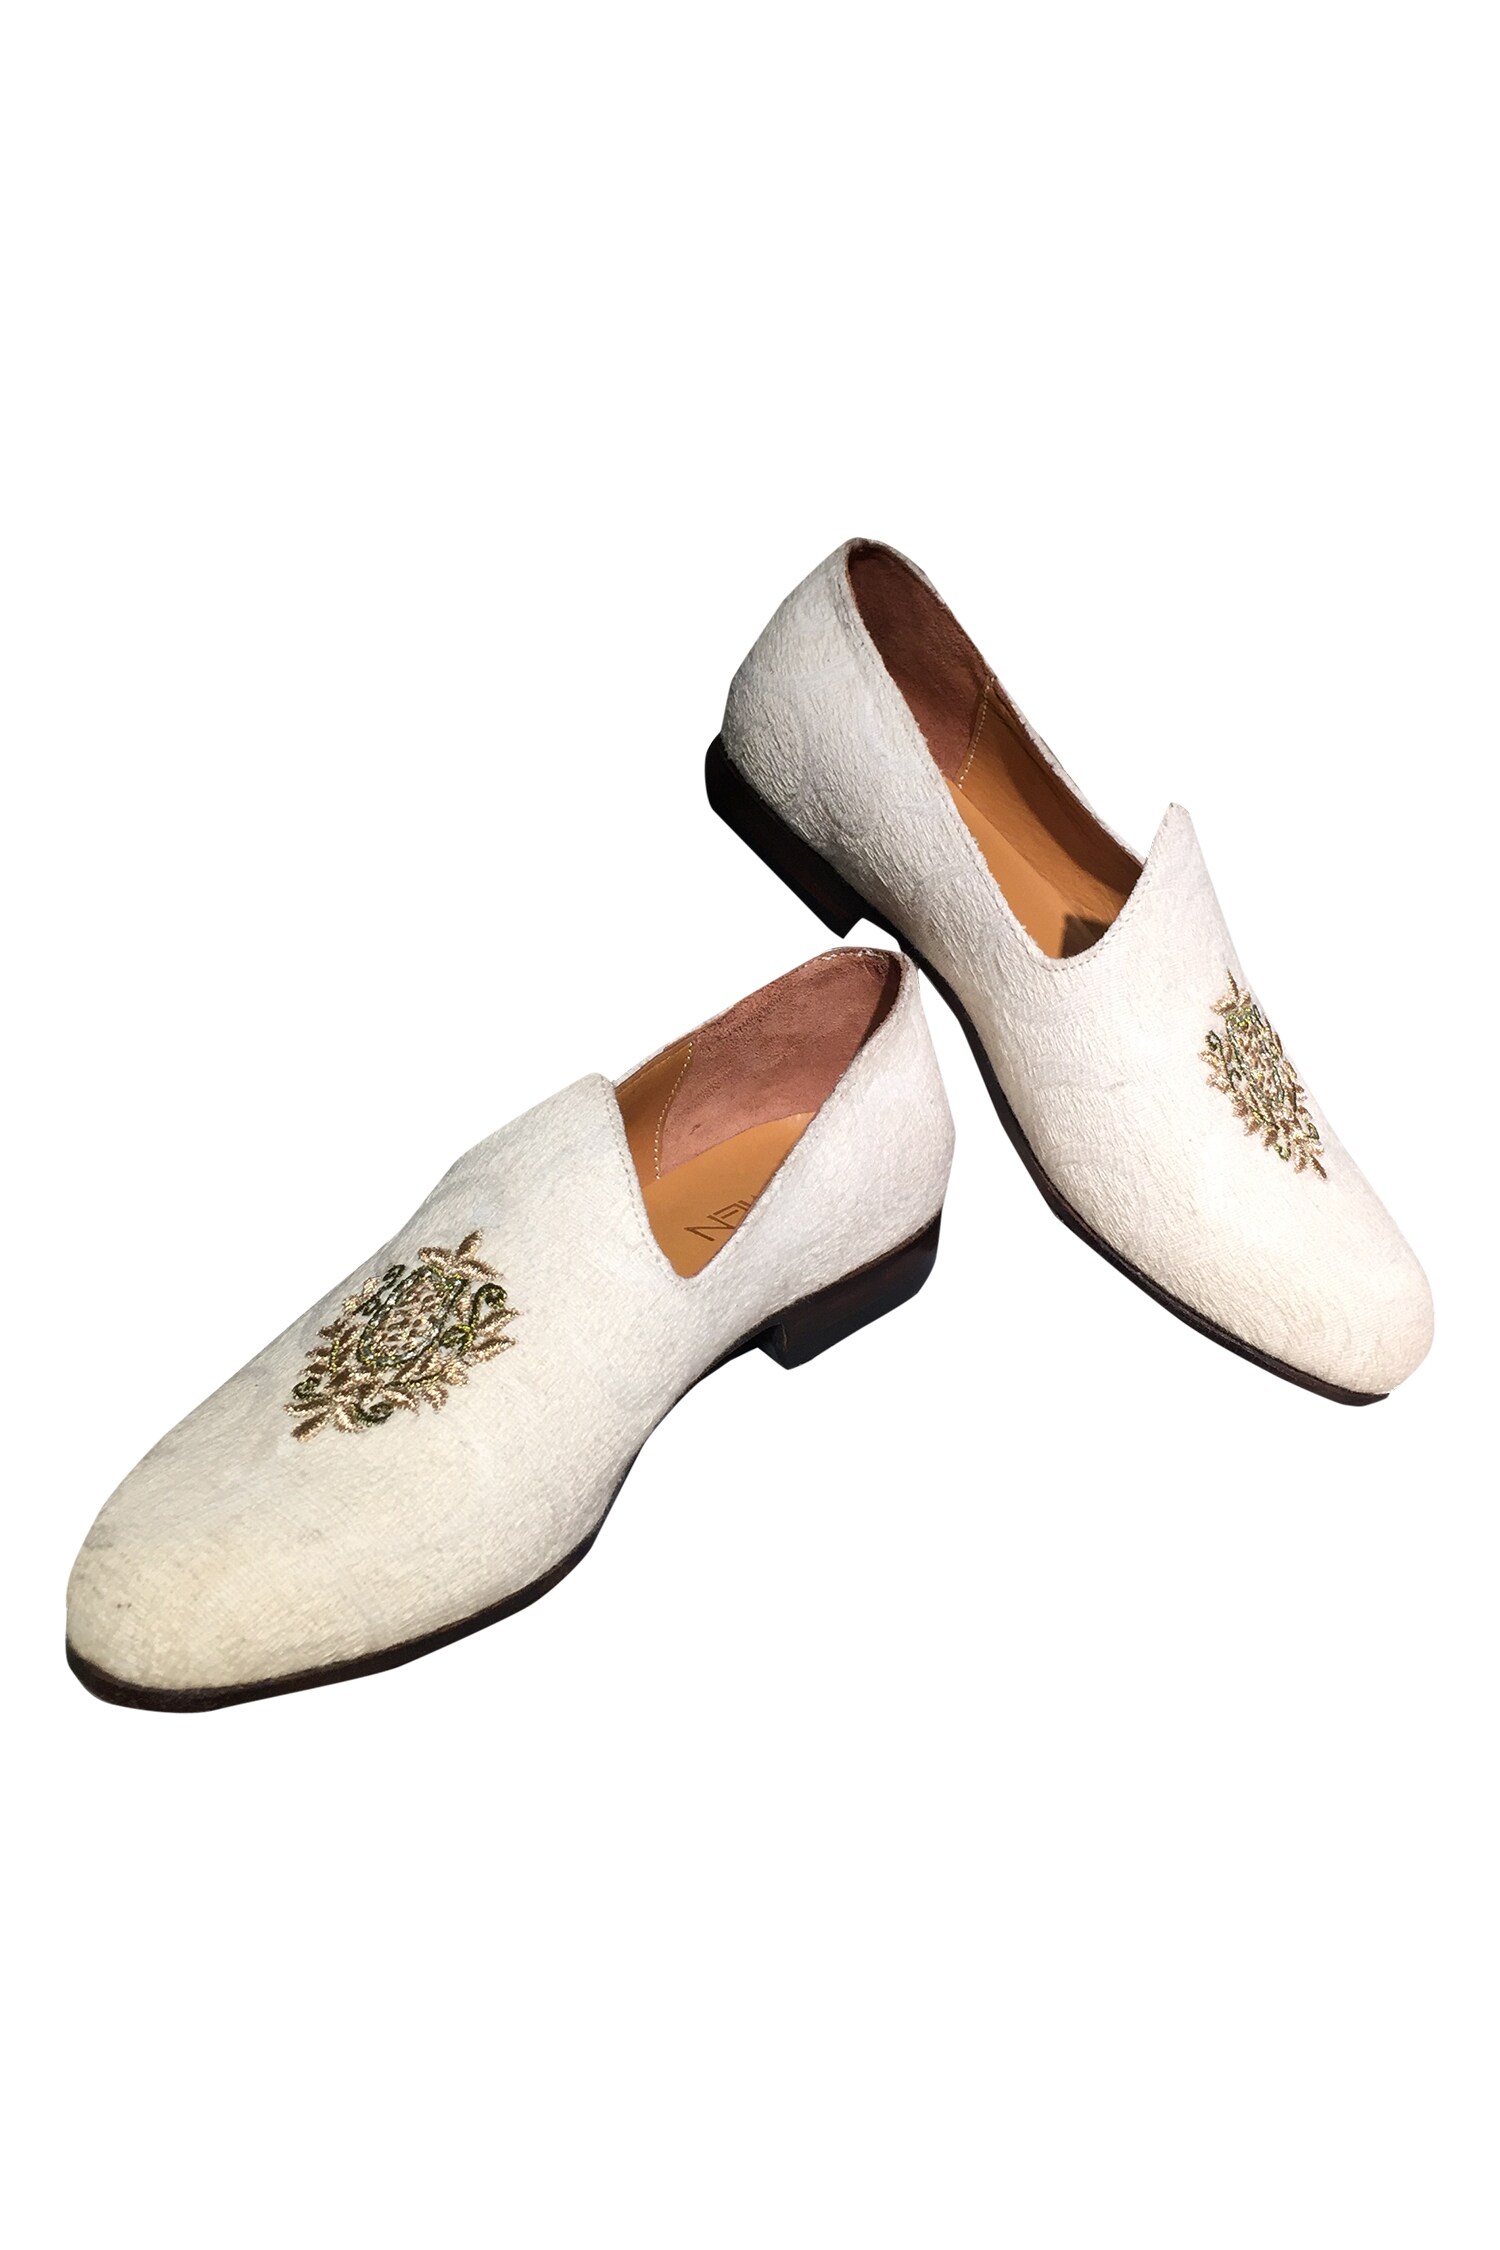 shoes for sherwani with heels